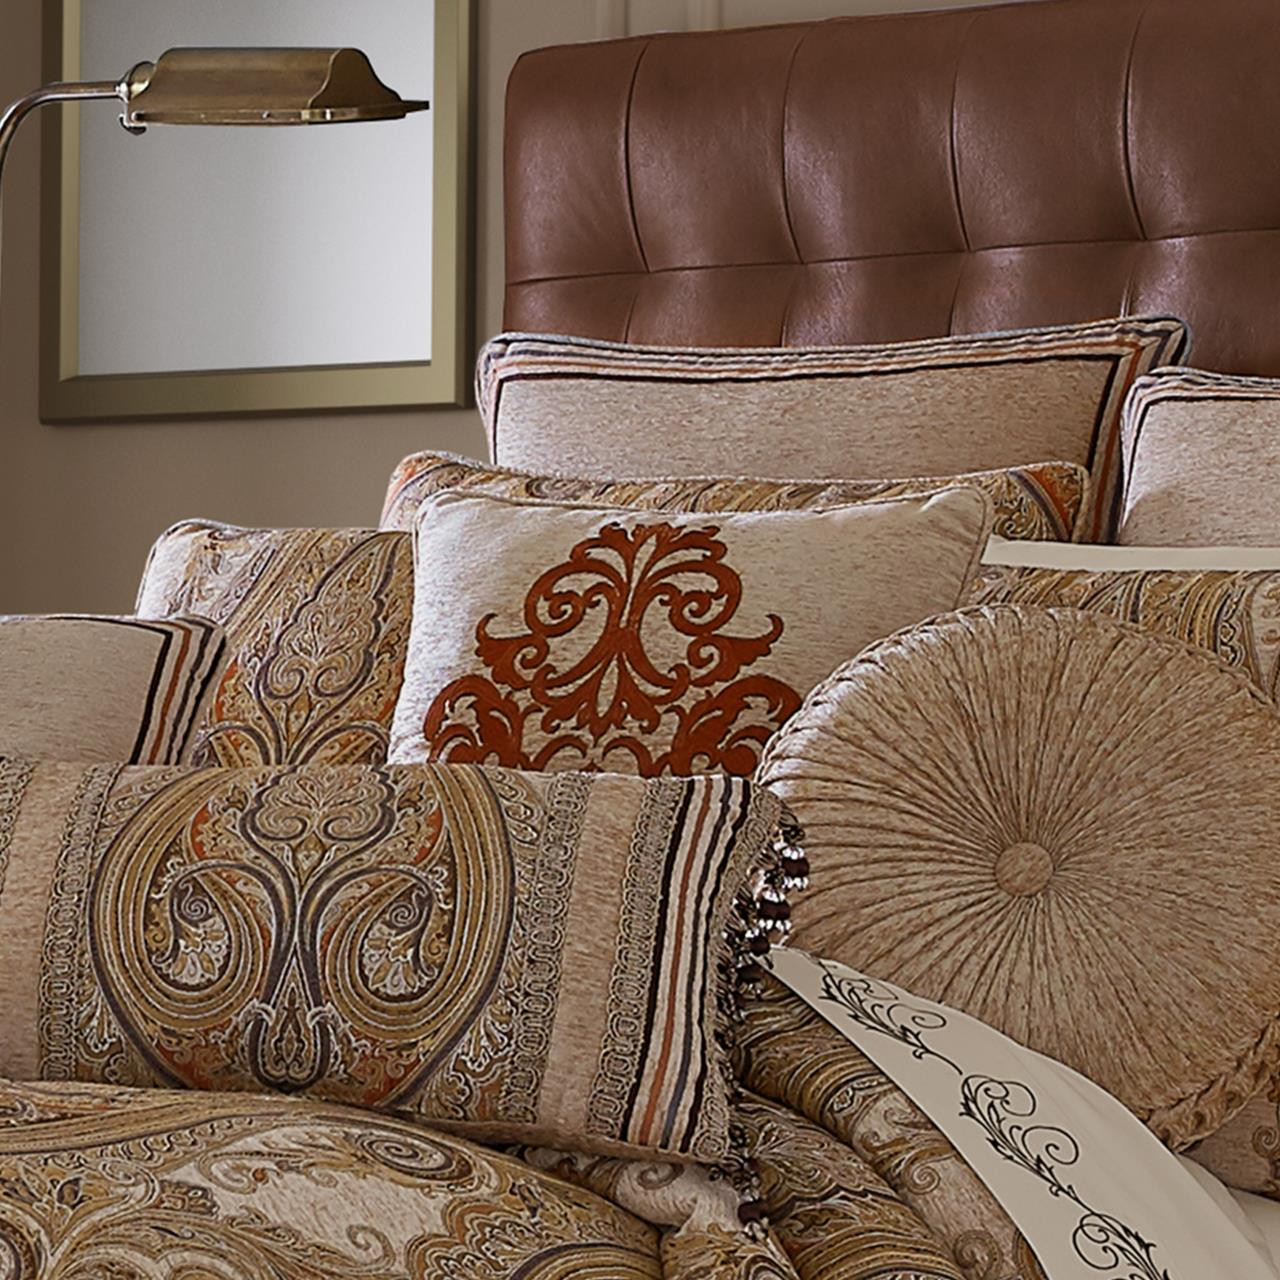 https://cdn10.bigcommerce.com/s-9ese1/products/16135/images/107468/Luciana-Beige-18-Square-Embroidered-Pillow-193842104323_image1__66304.1591887337.1280.1280.jpg?c=2